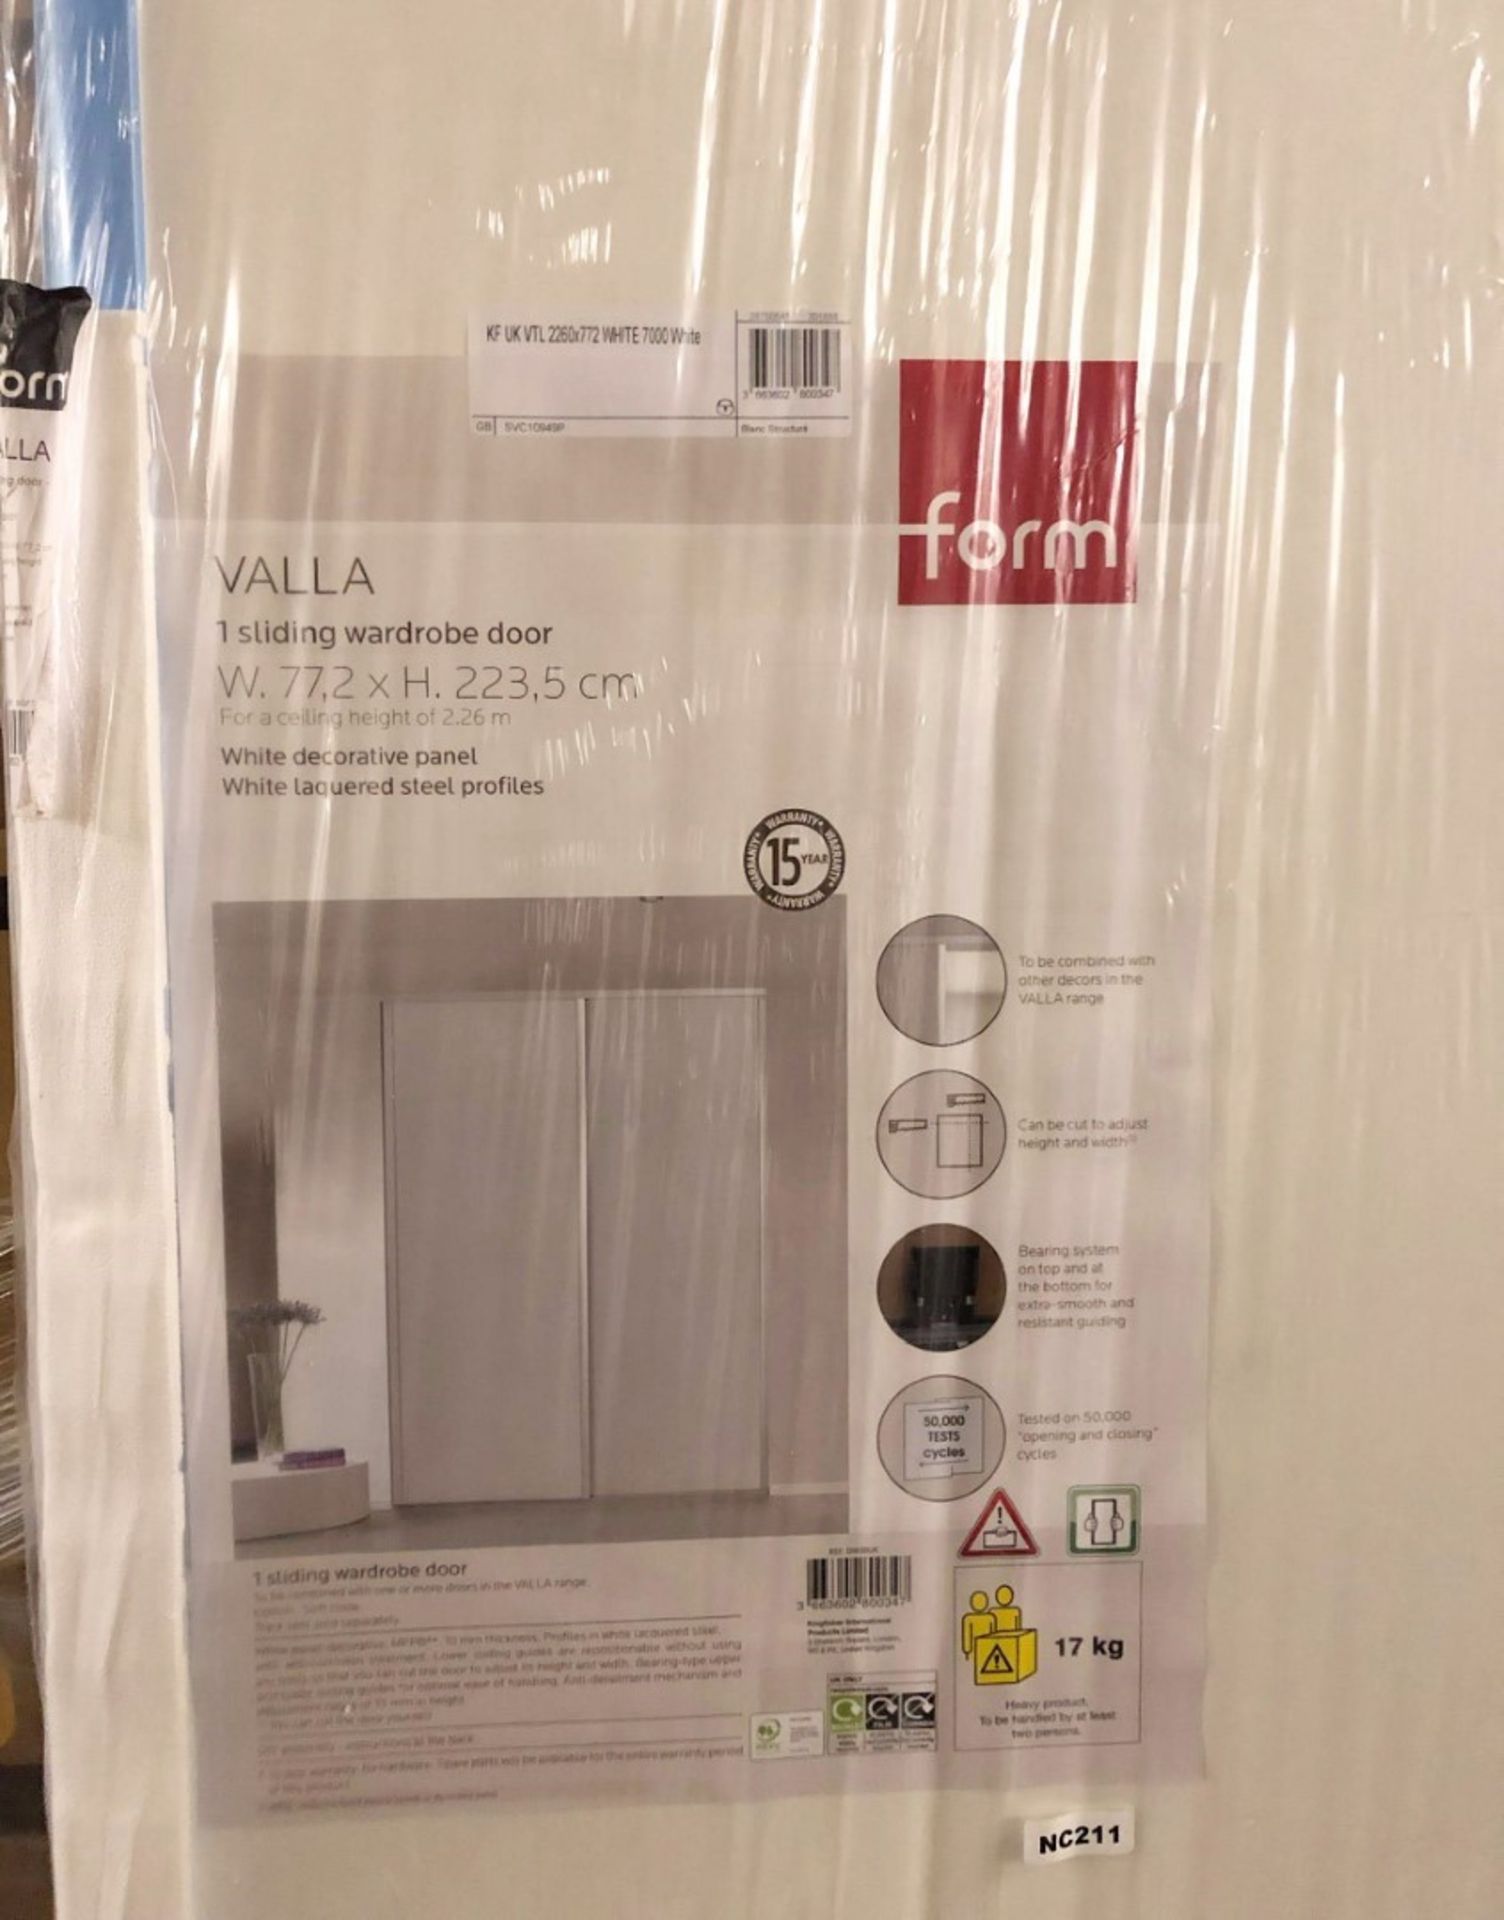 1 x VALLA 1 Sliding Wardrobe Door In White Decorative Panel With White Lacquered Steel Profiles - CL - Image 3 of 4